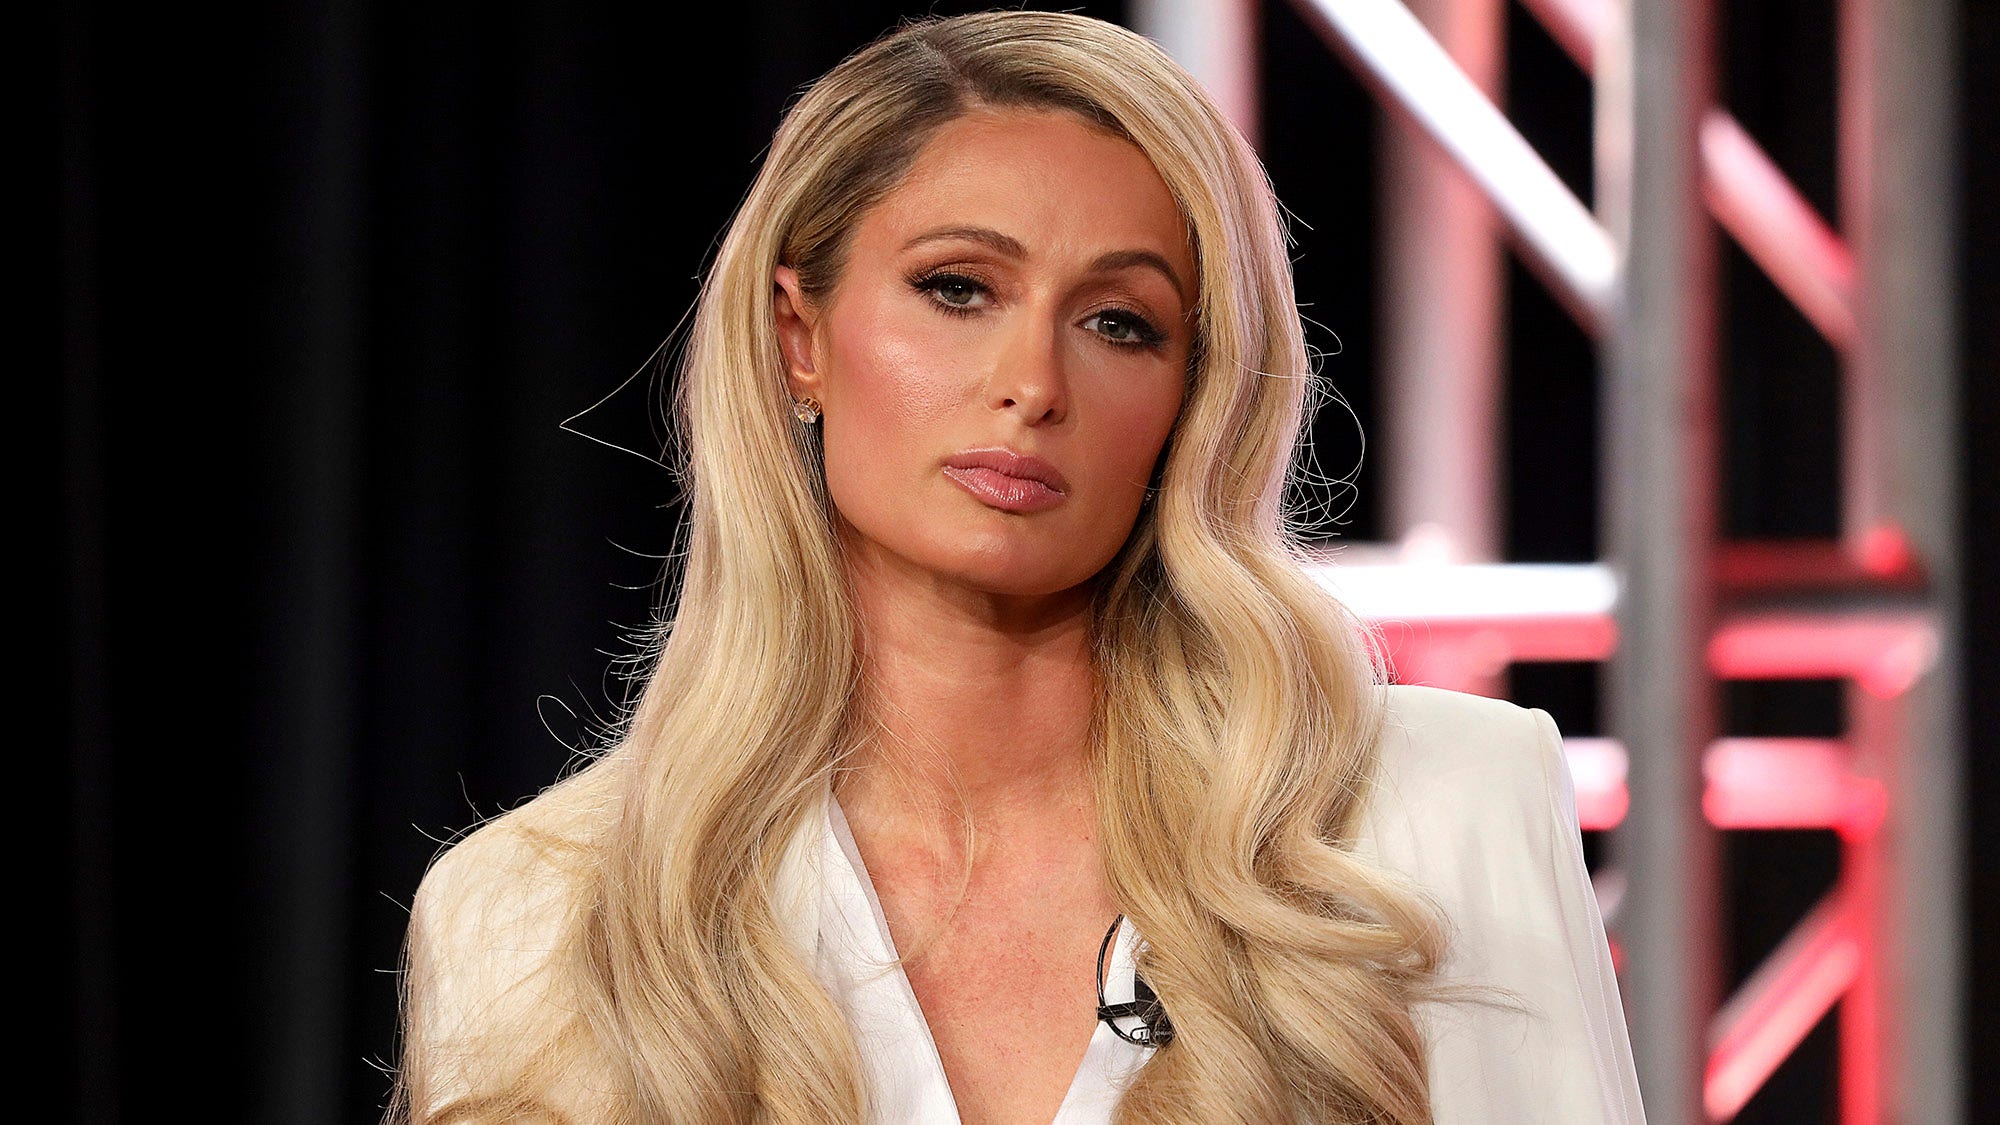 Paris Hilton calls for Utah boarding school's closure following her abuse allegations, starts petition - Fox News